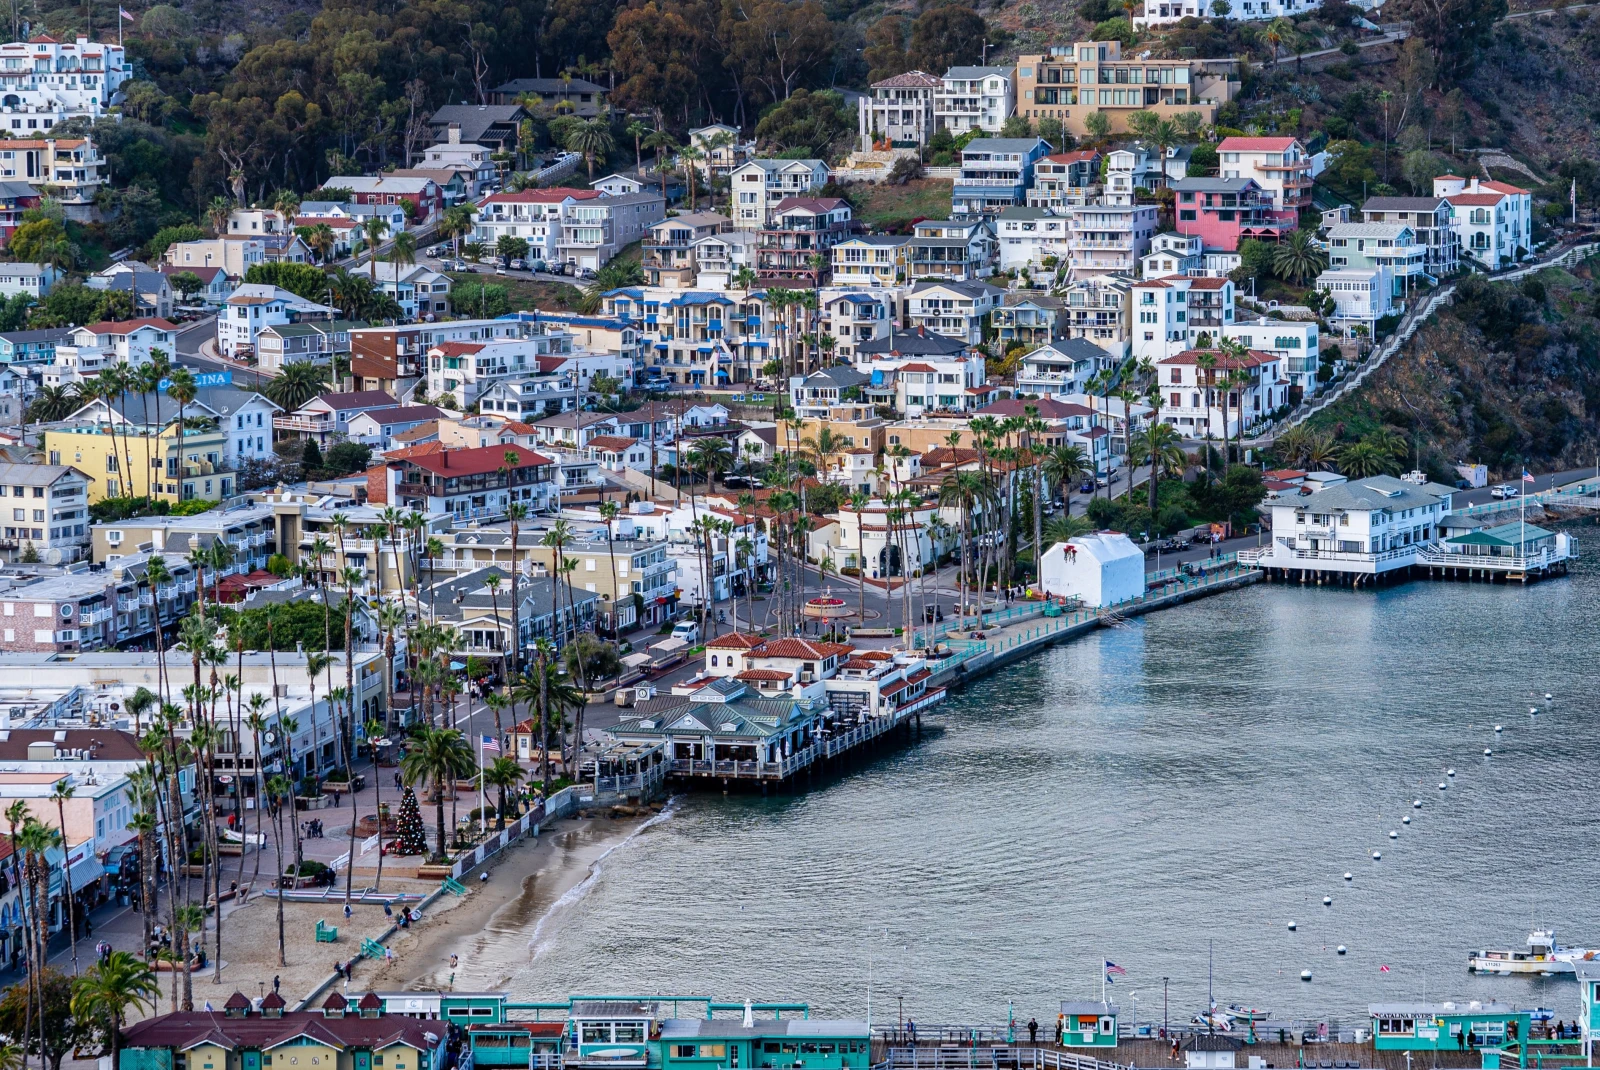 The coast of Santa Catalina with colorful houses and a dock. 